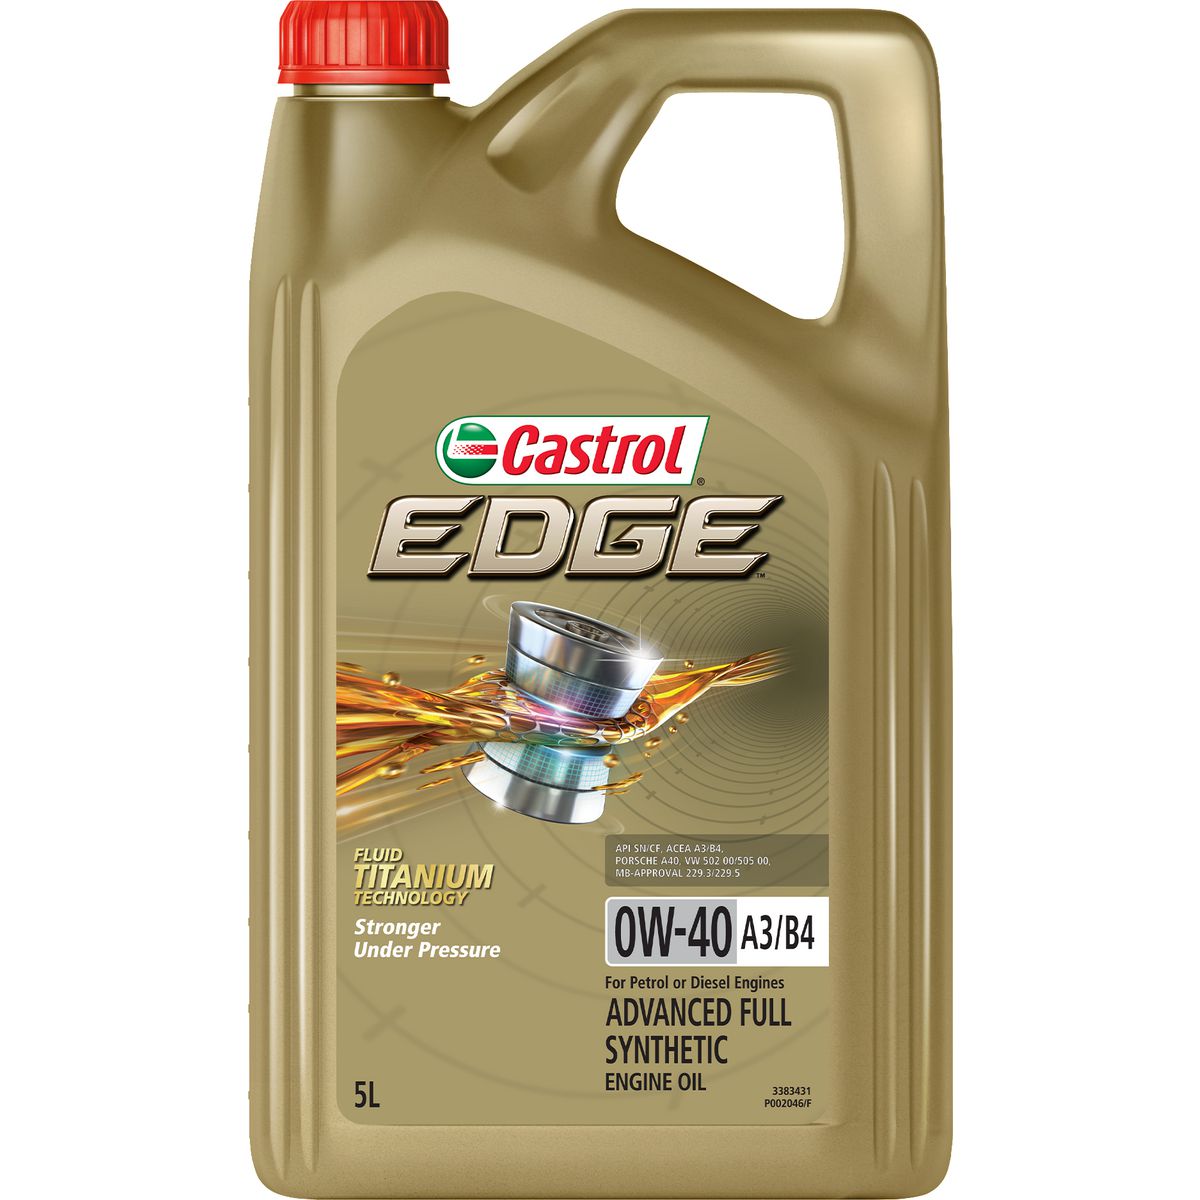 Castrol Edge 5W30 A3/B4 Synthetic Engine Oil 5L 3421196, Automotive  Superstore